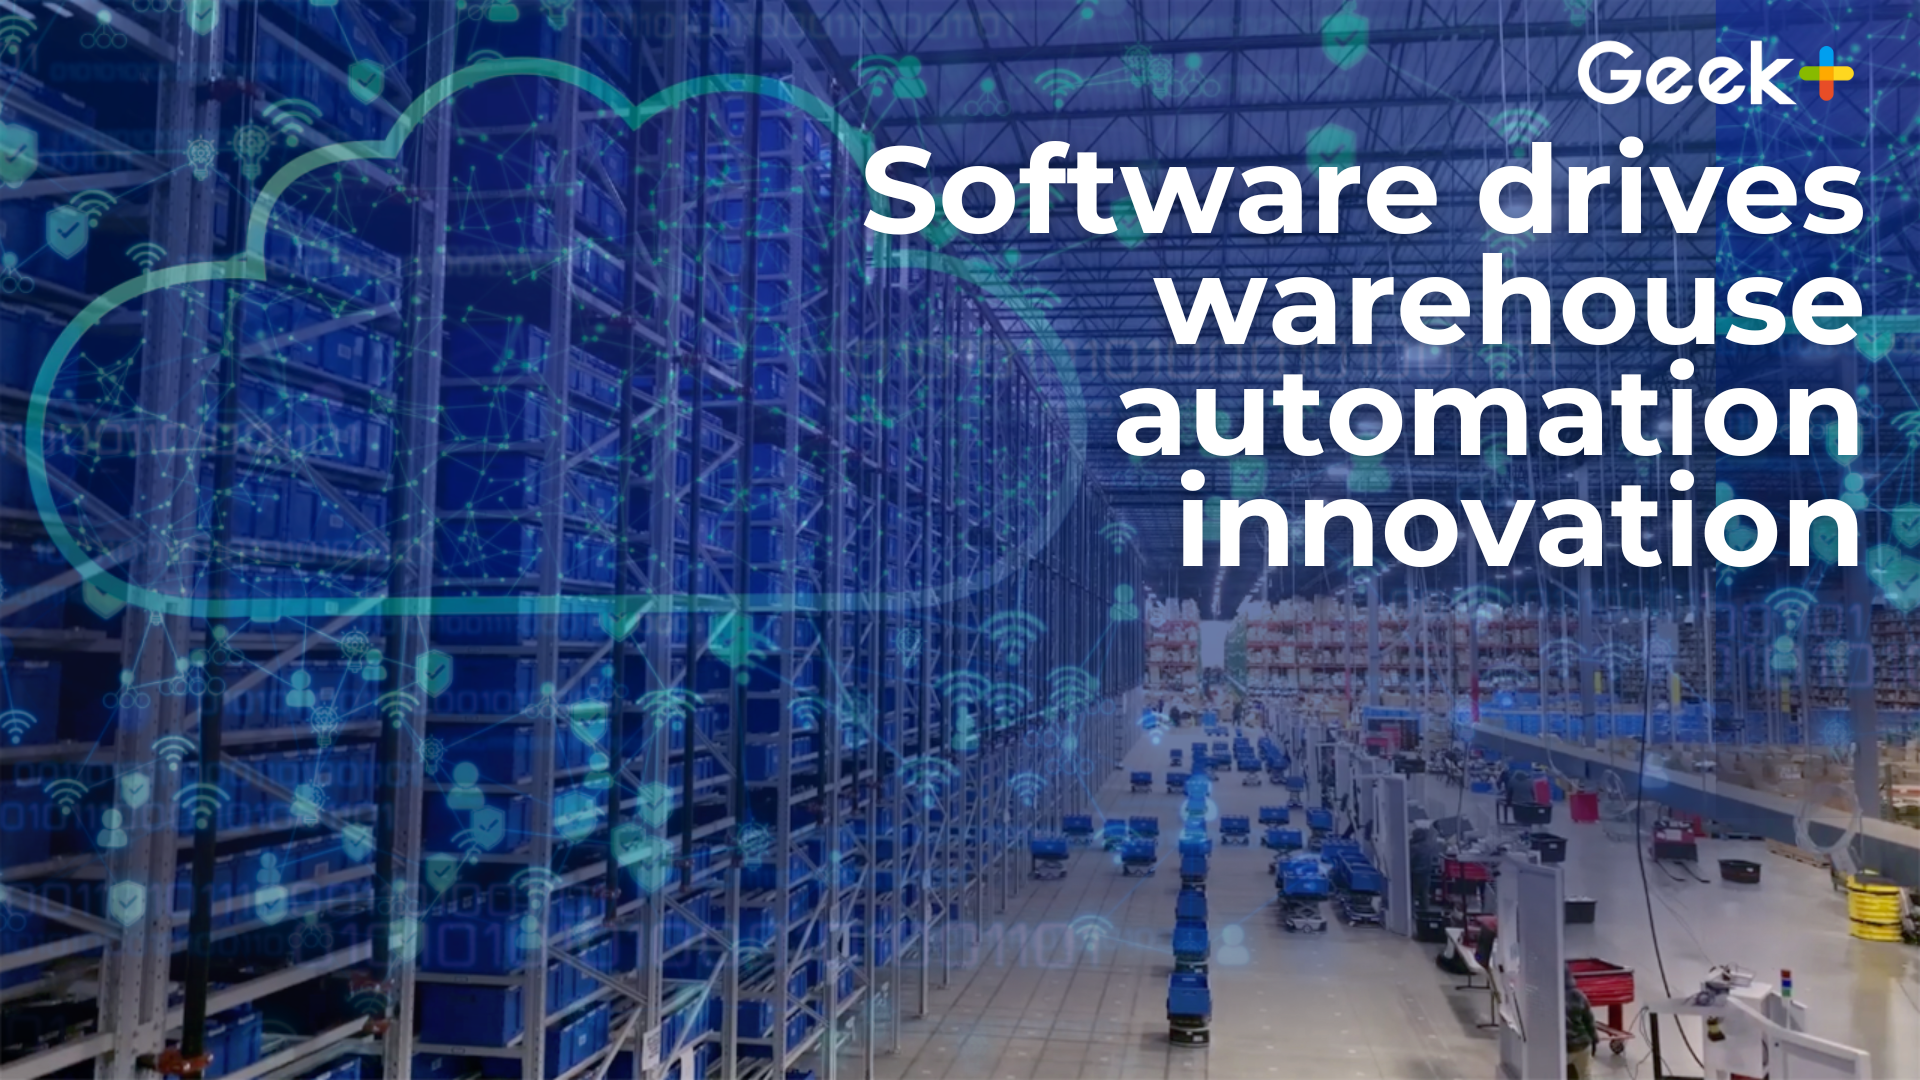 Software innovation is crucial to revolutionizing warehouse automation